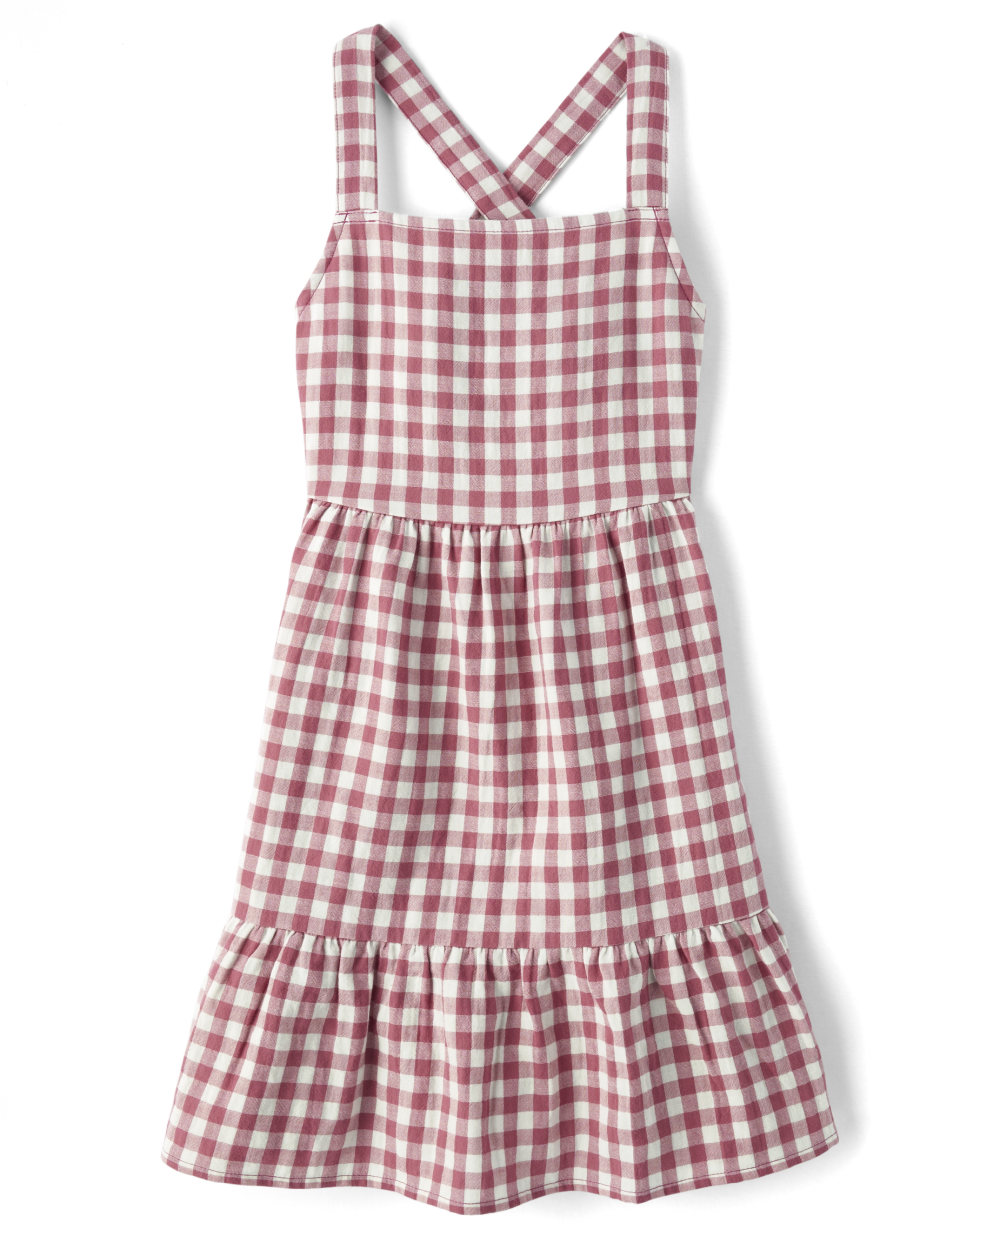 Girls Checkered Gingham Print Above the Knee Square Neck Sleeveless Dress With Ruffles